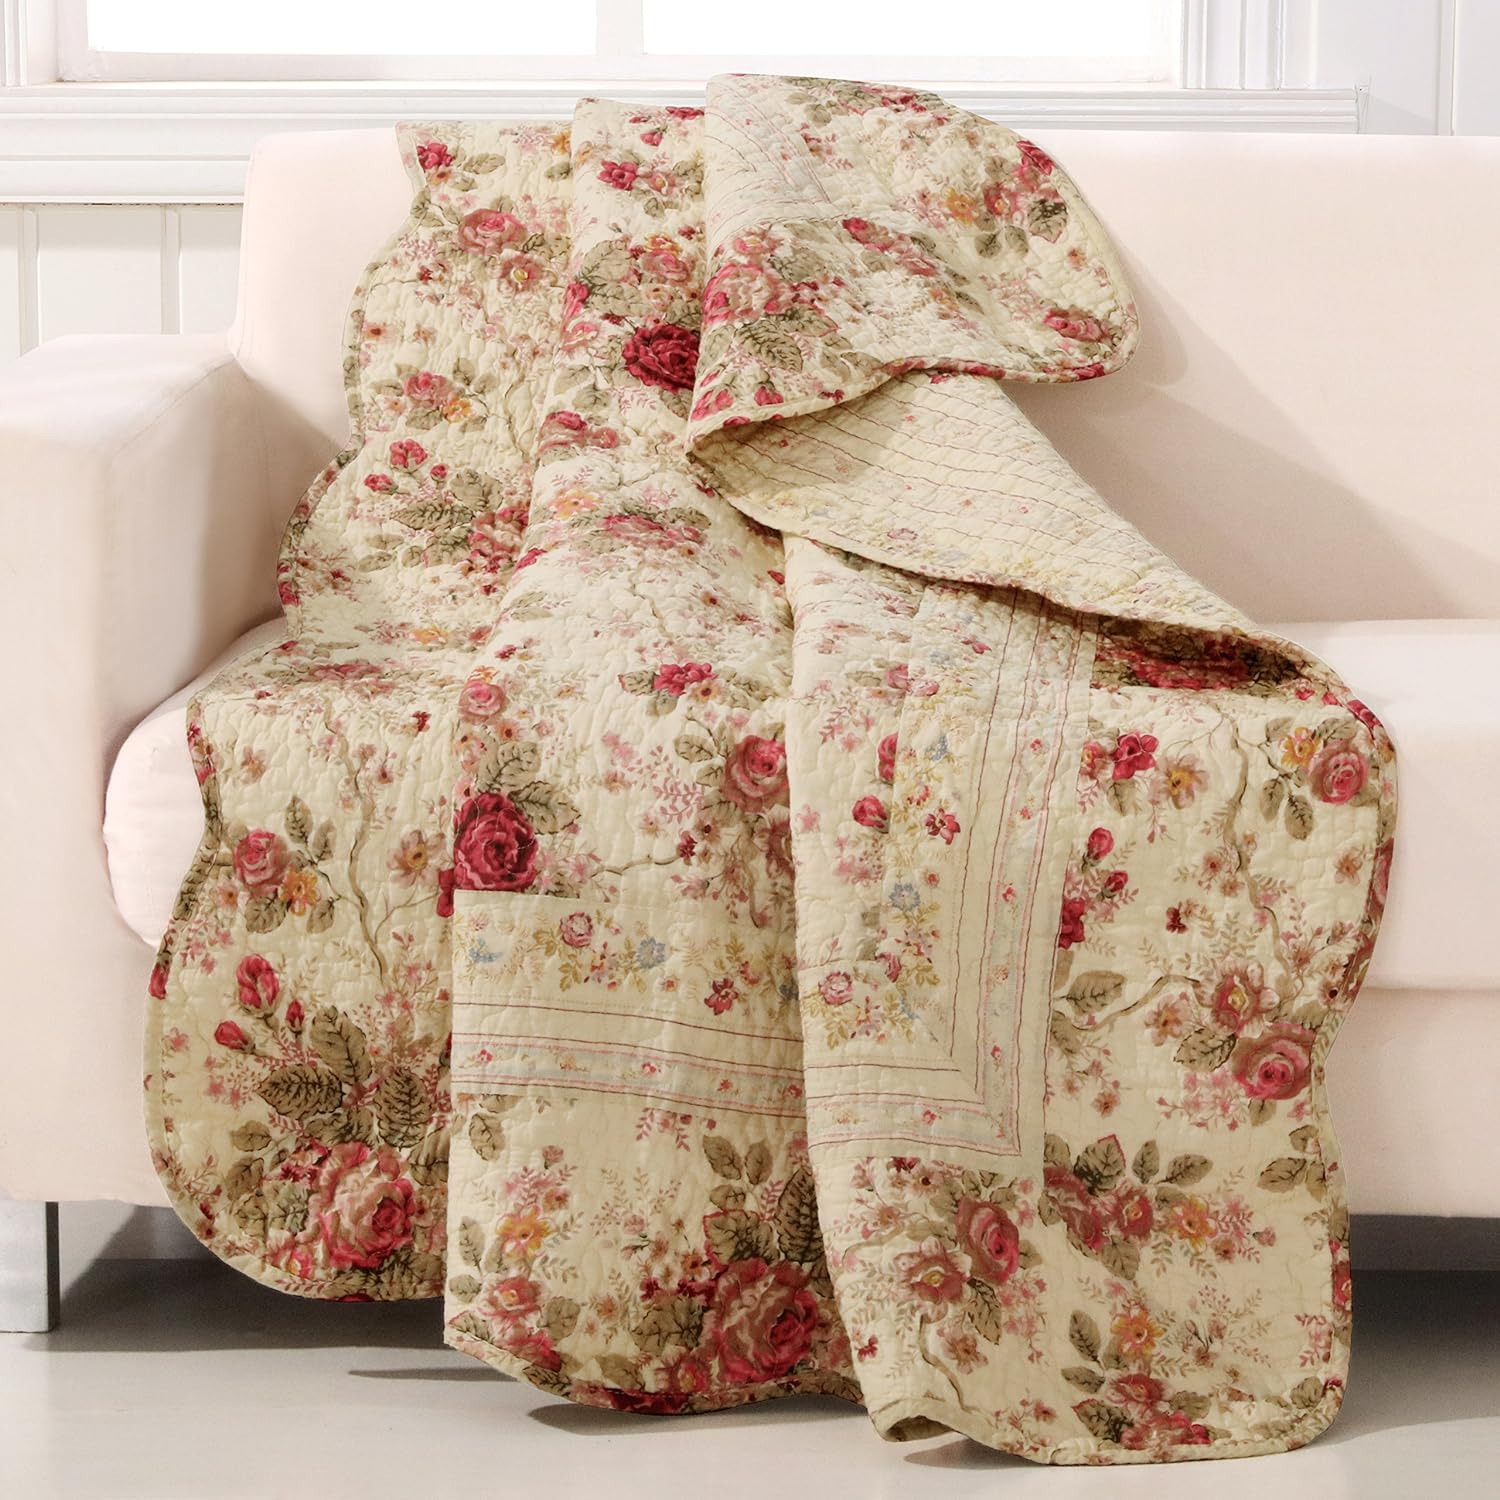 Antique Rose - Classic Traditional Floral - 100% Cotton Quilted Throw Blanket, 5